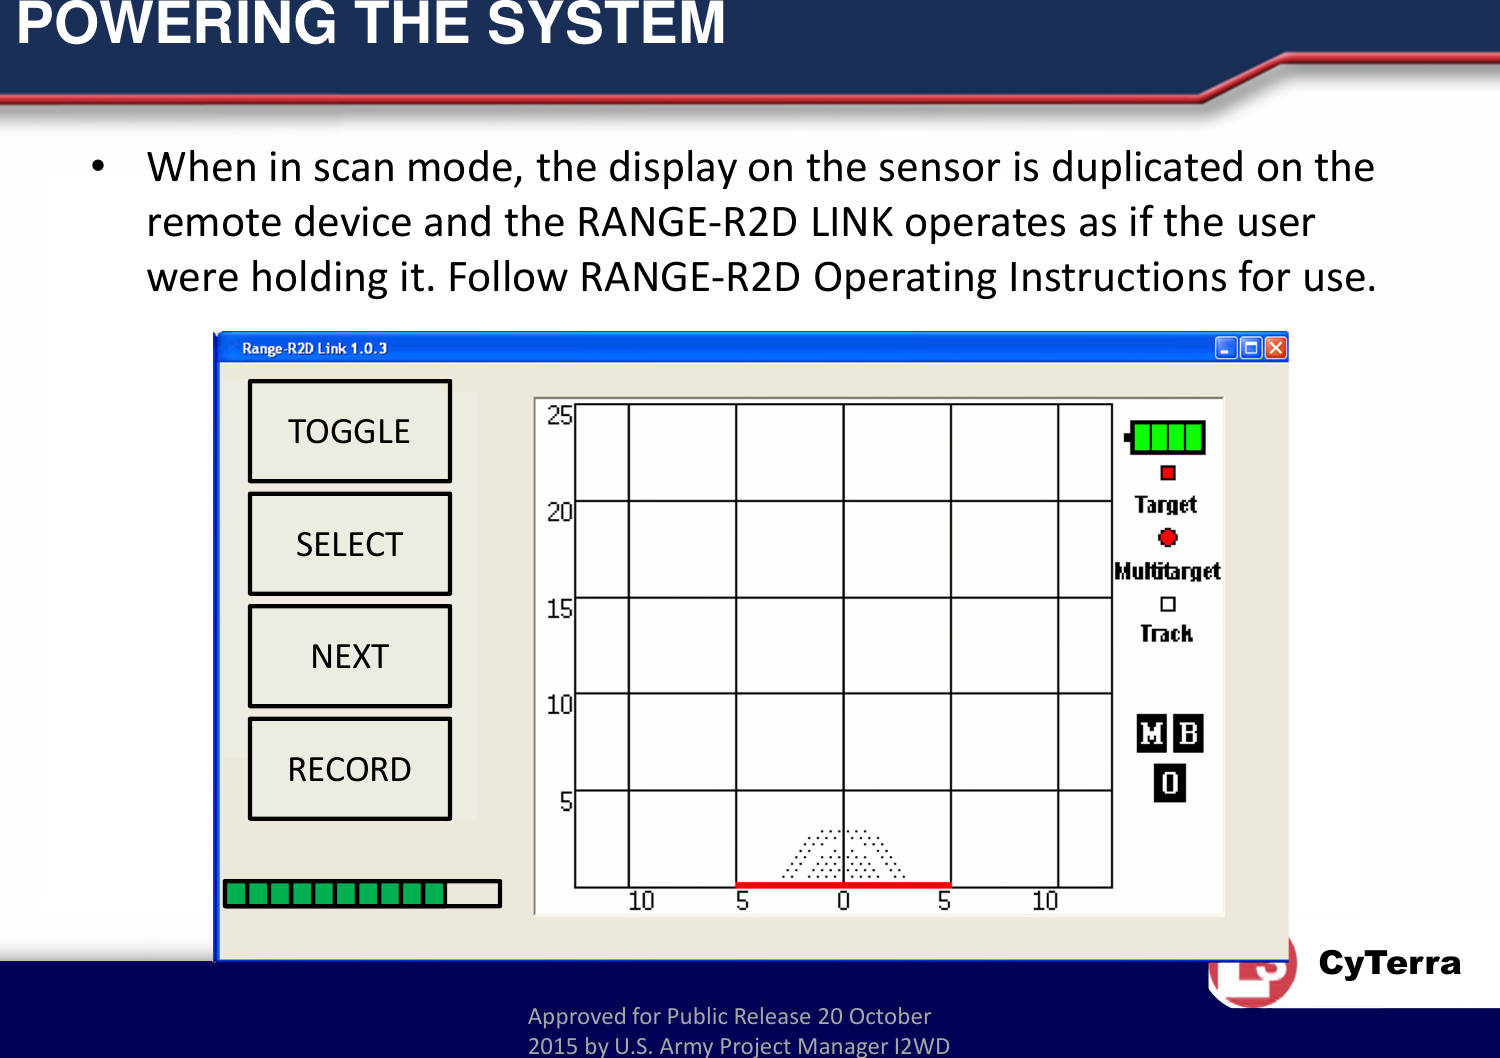 Approved for Public Release 20 October 2015 by U.S. Army Project Manager I2WDCyTerraPOWERING THE SYSTEM•When in scan mode, the display on the sensor is duplicated on the remote device and the RANGE-R2D LINK operates as if the user were holding it. Follow RANGE-R2D Operating Instructions for use.TOGGLESELECTNEXTRECORD